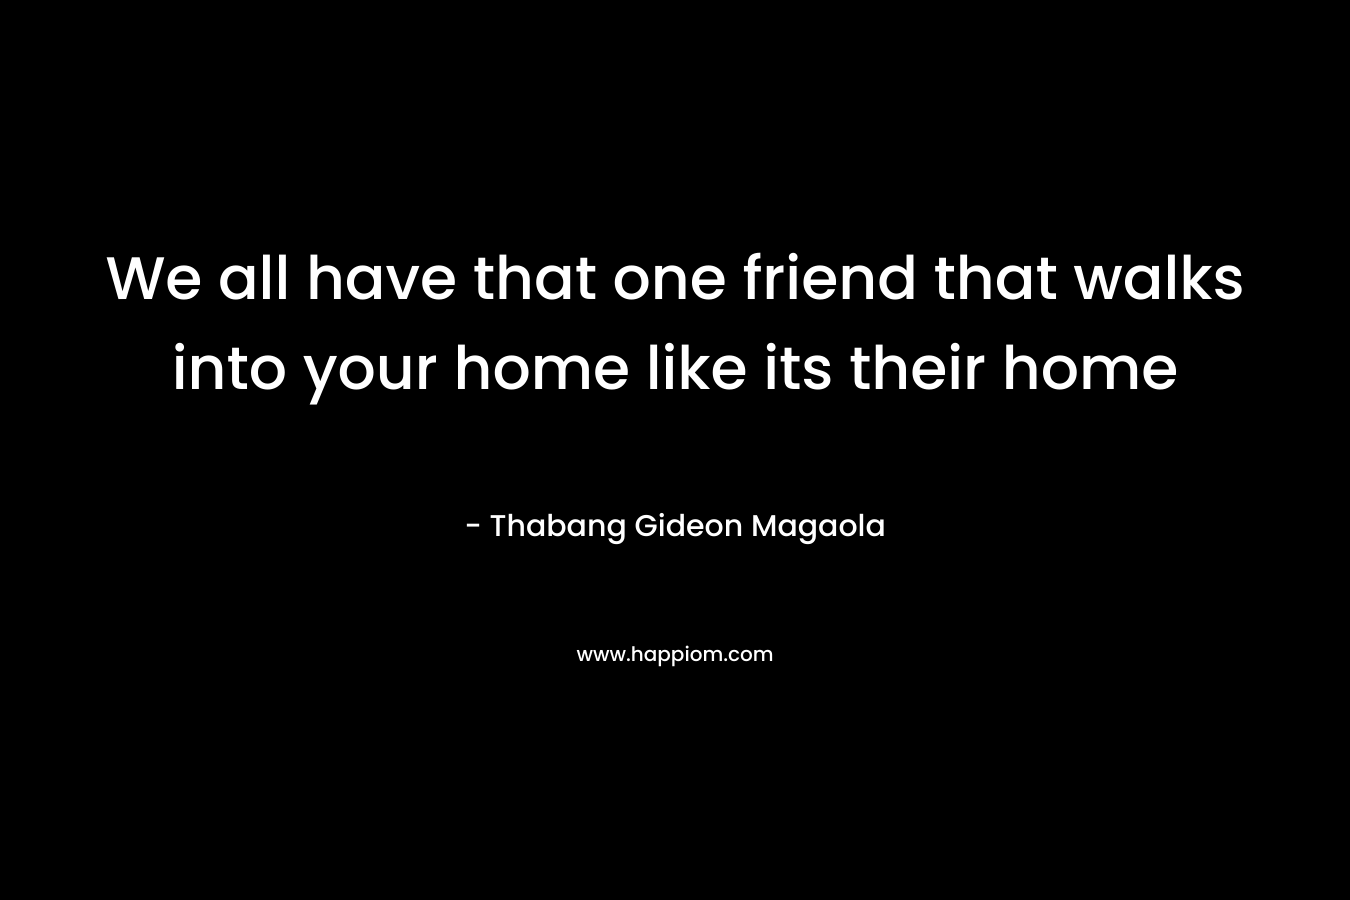 We all have that one friend that walks into your home like its their home – Thabang Gideon Magaola